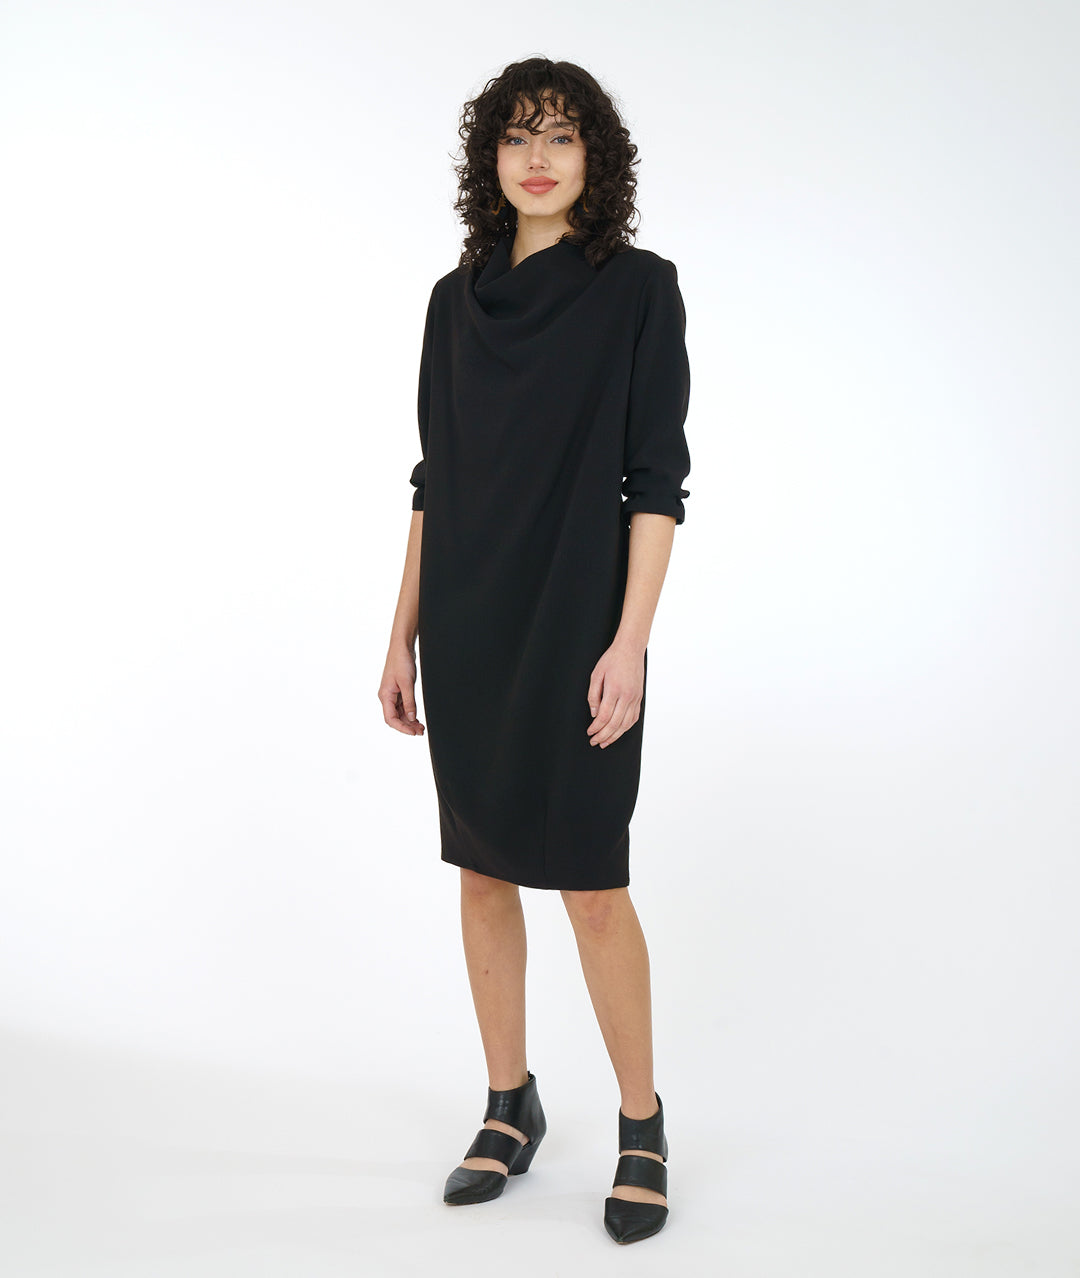 model in a black shift dress with long sleeves and a soft cowl neck